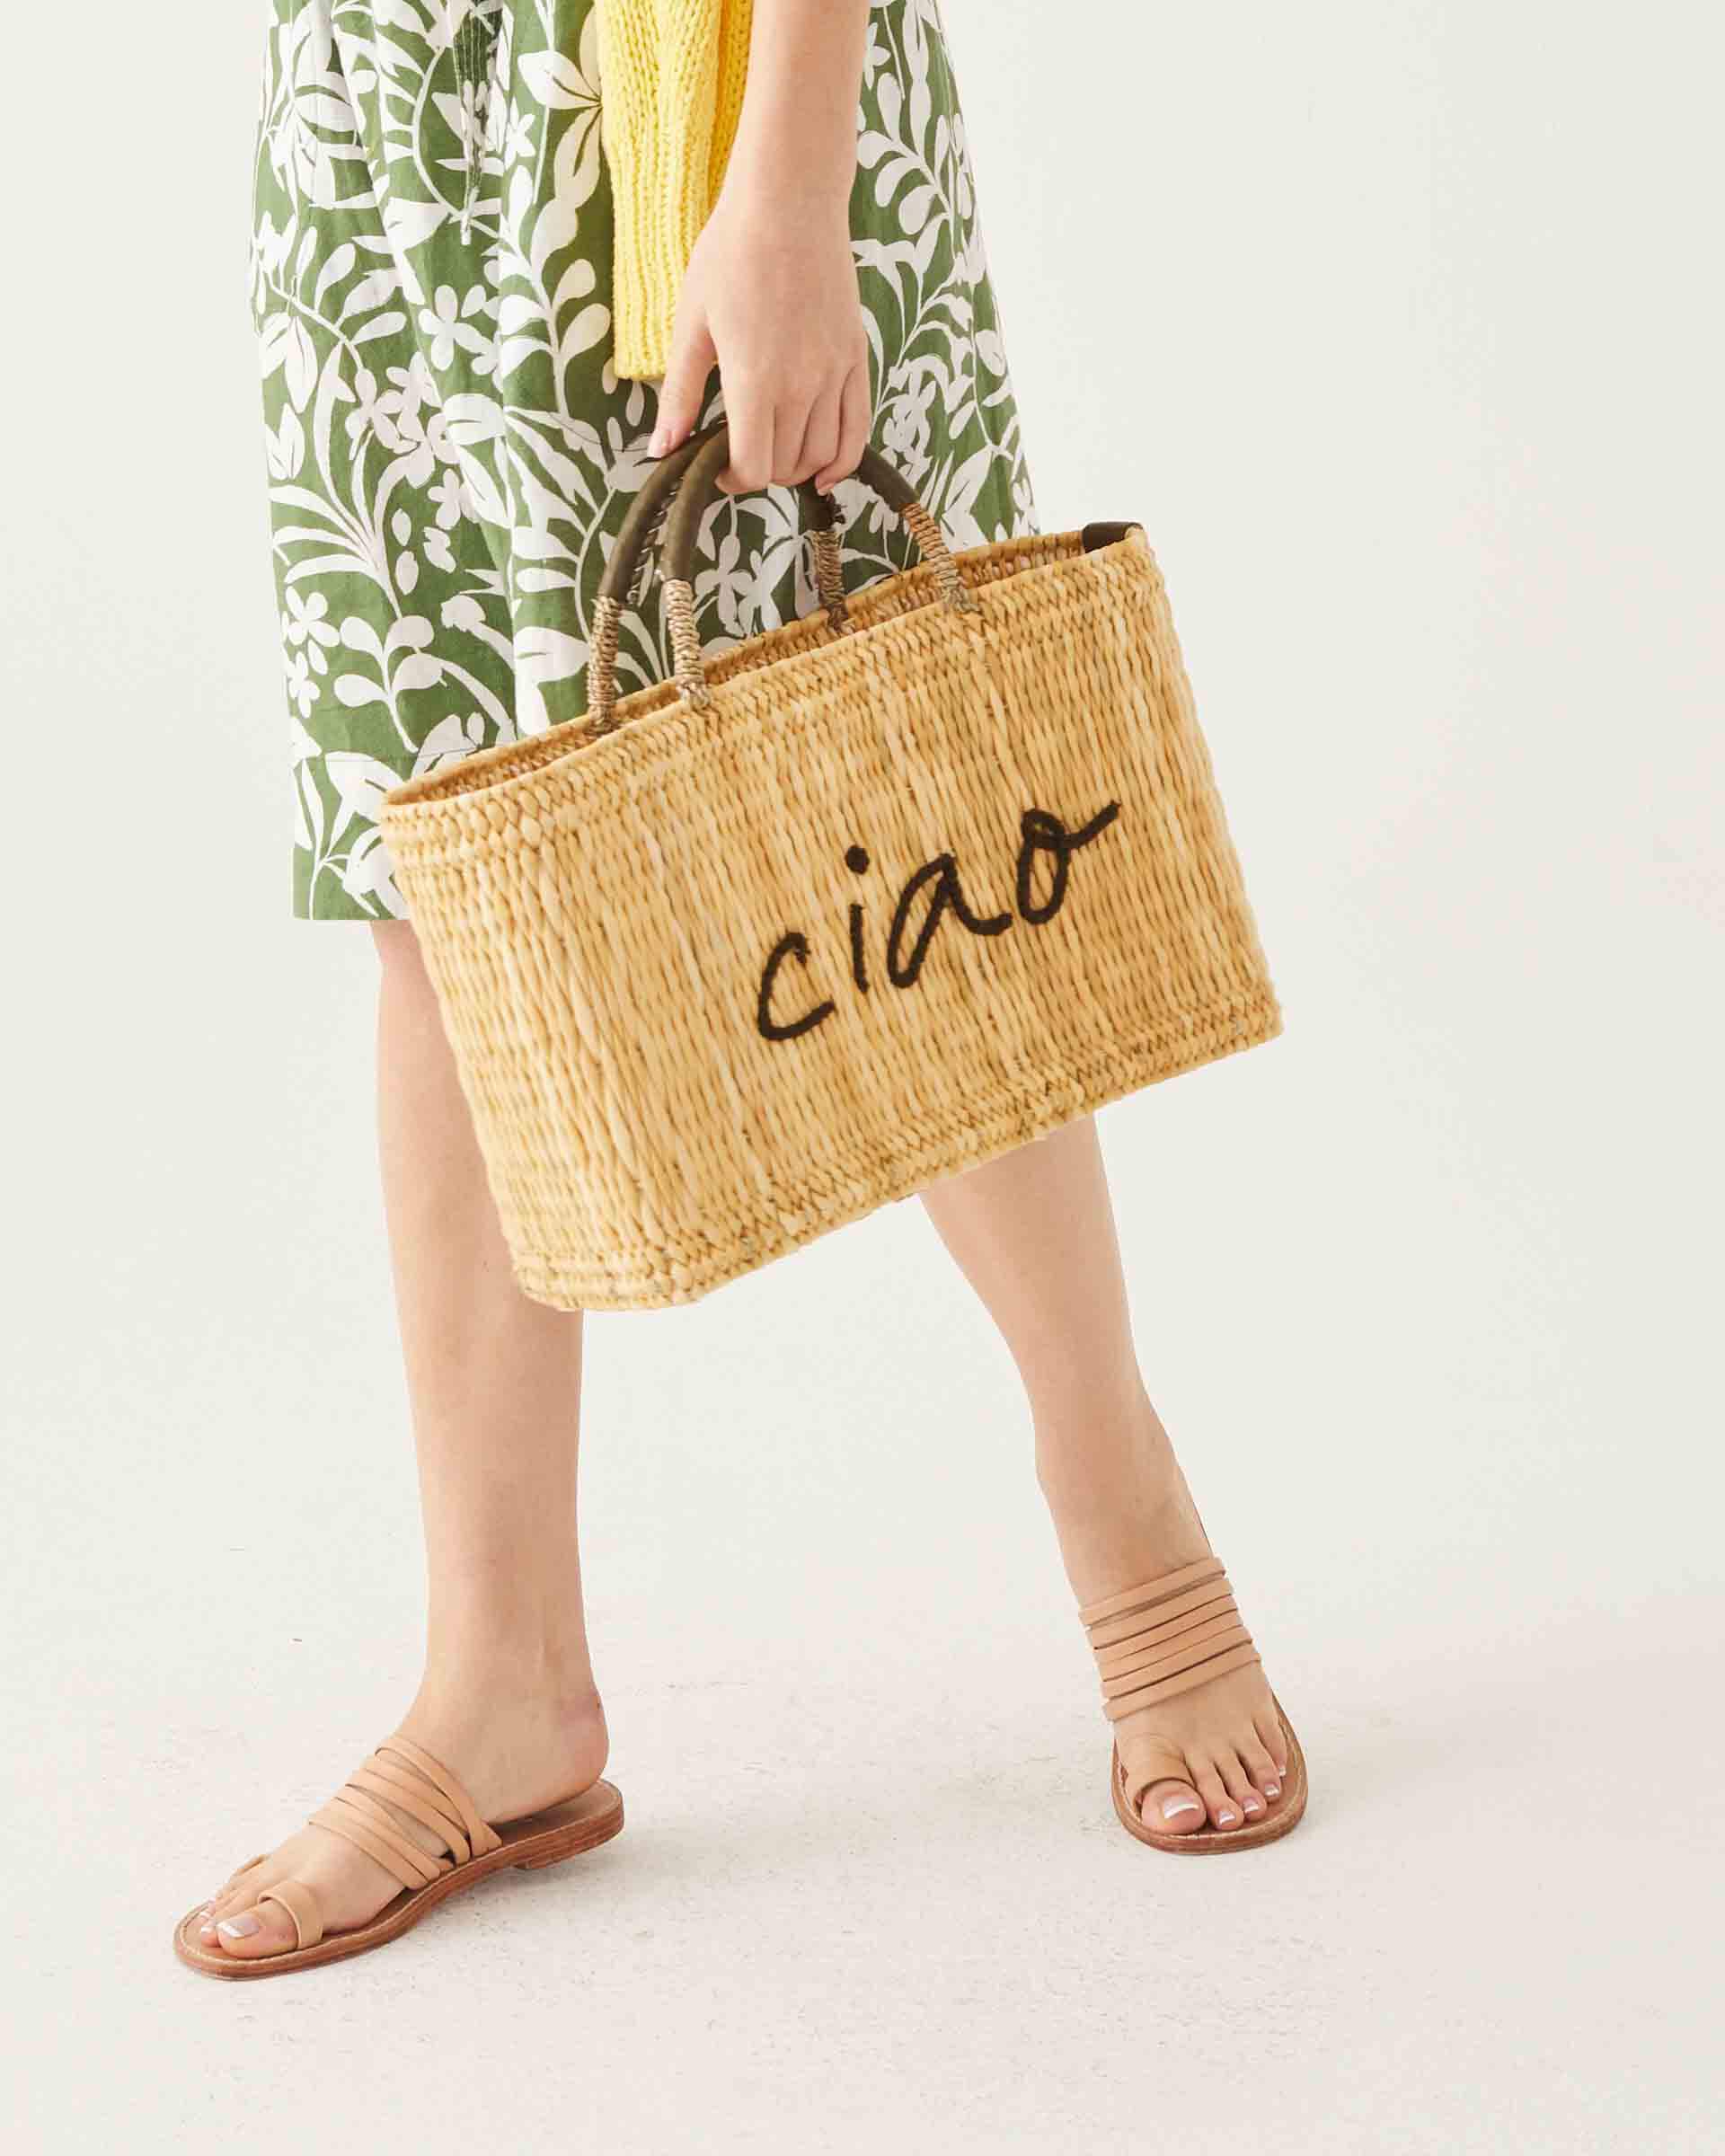 Female holdingg a straw basket with the word Ciao embroidered in black